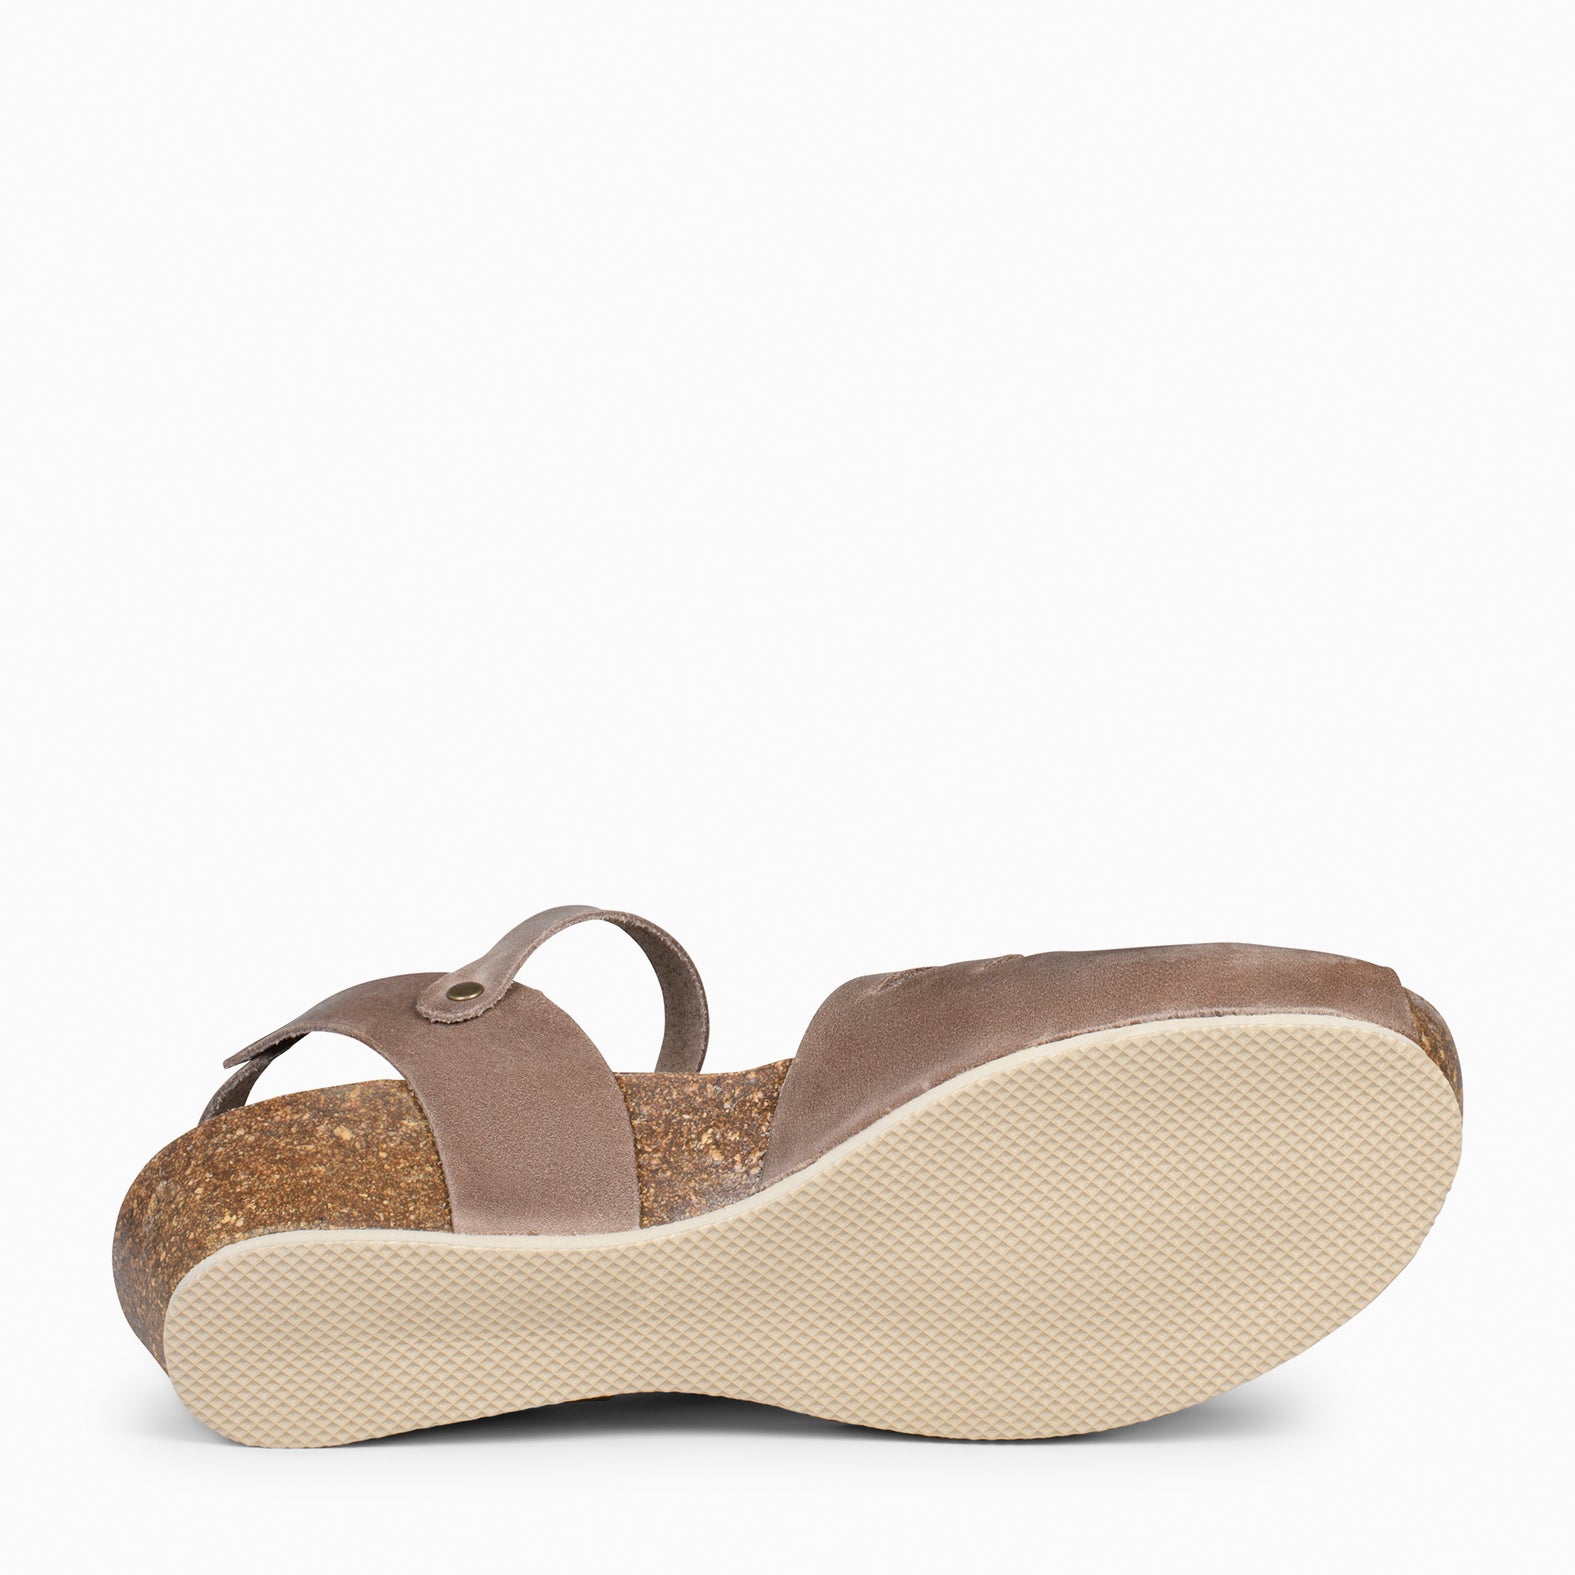 ALOE – TAUPE BIO sandals with wedge